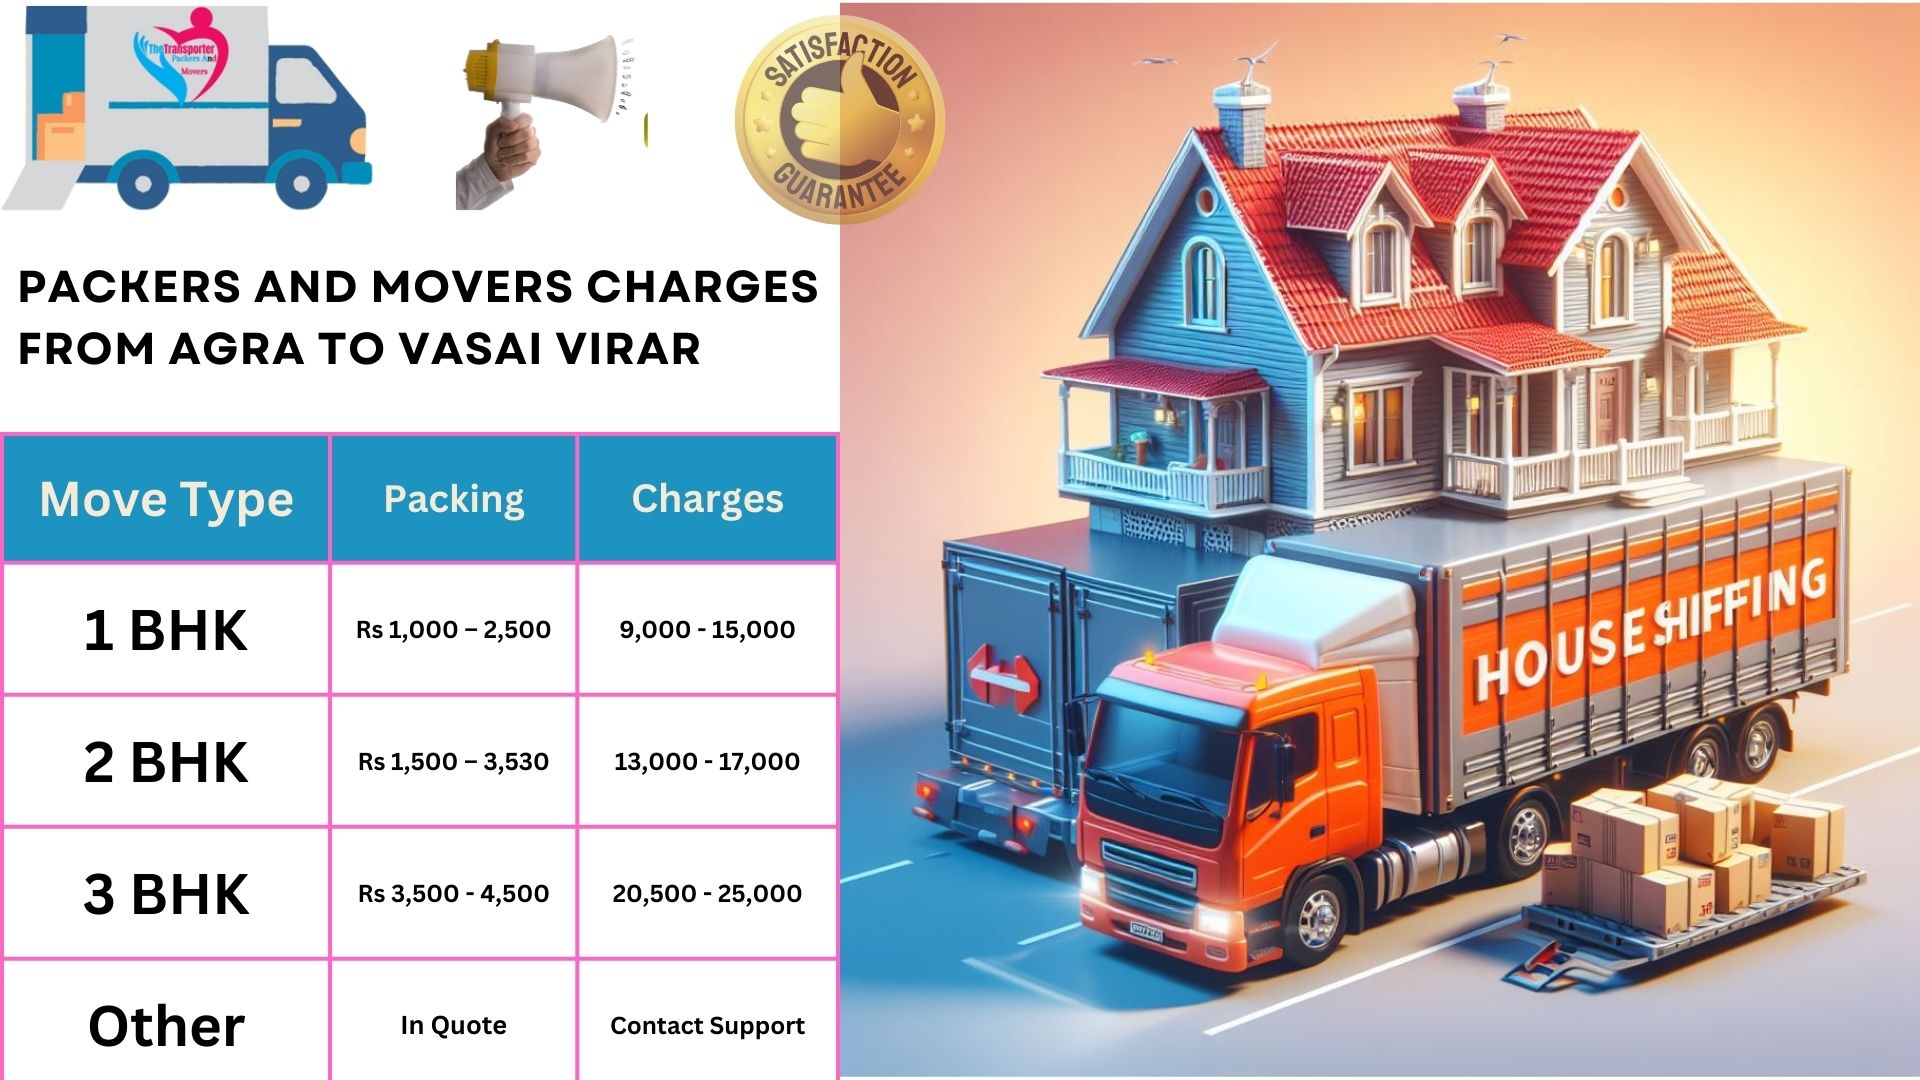 Your household goods shifting from Agra to Vasai Virar